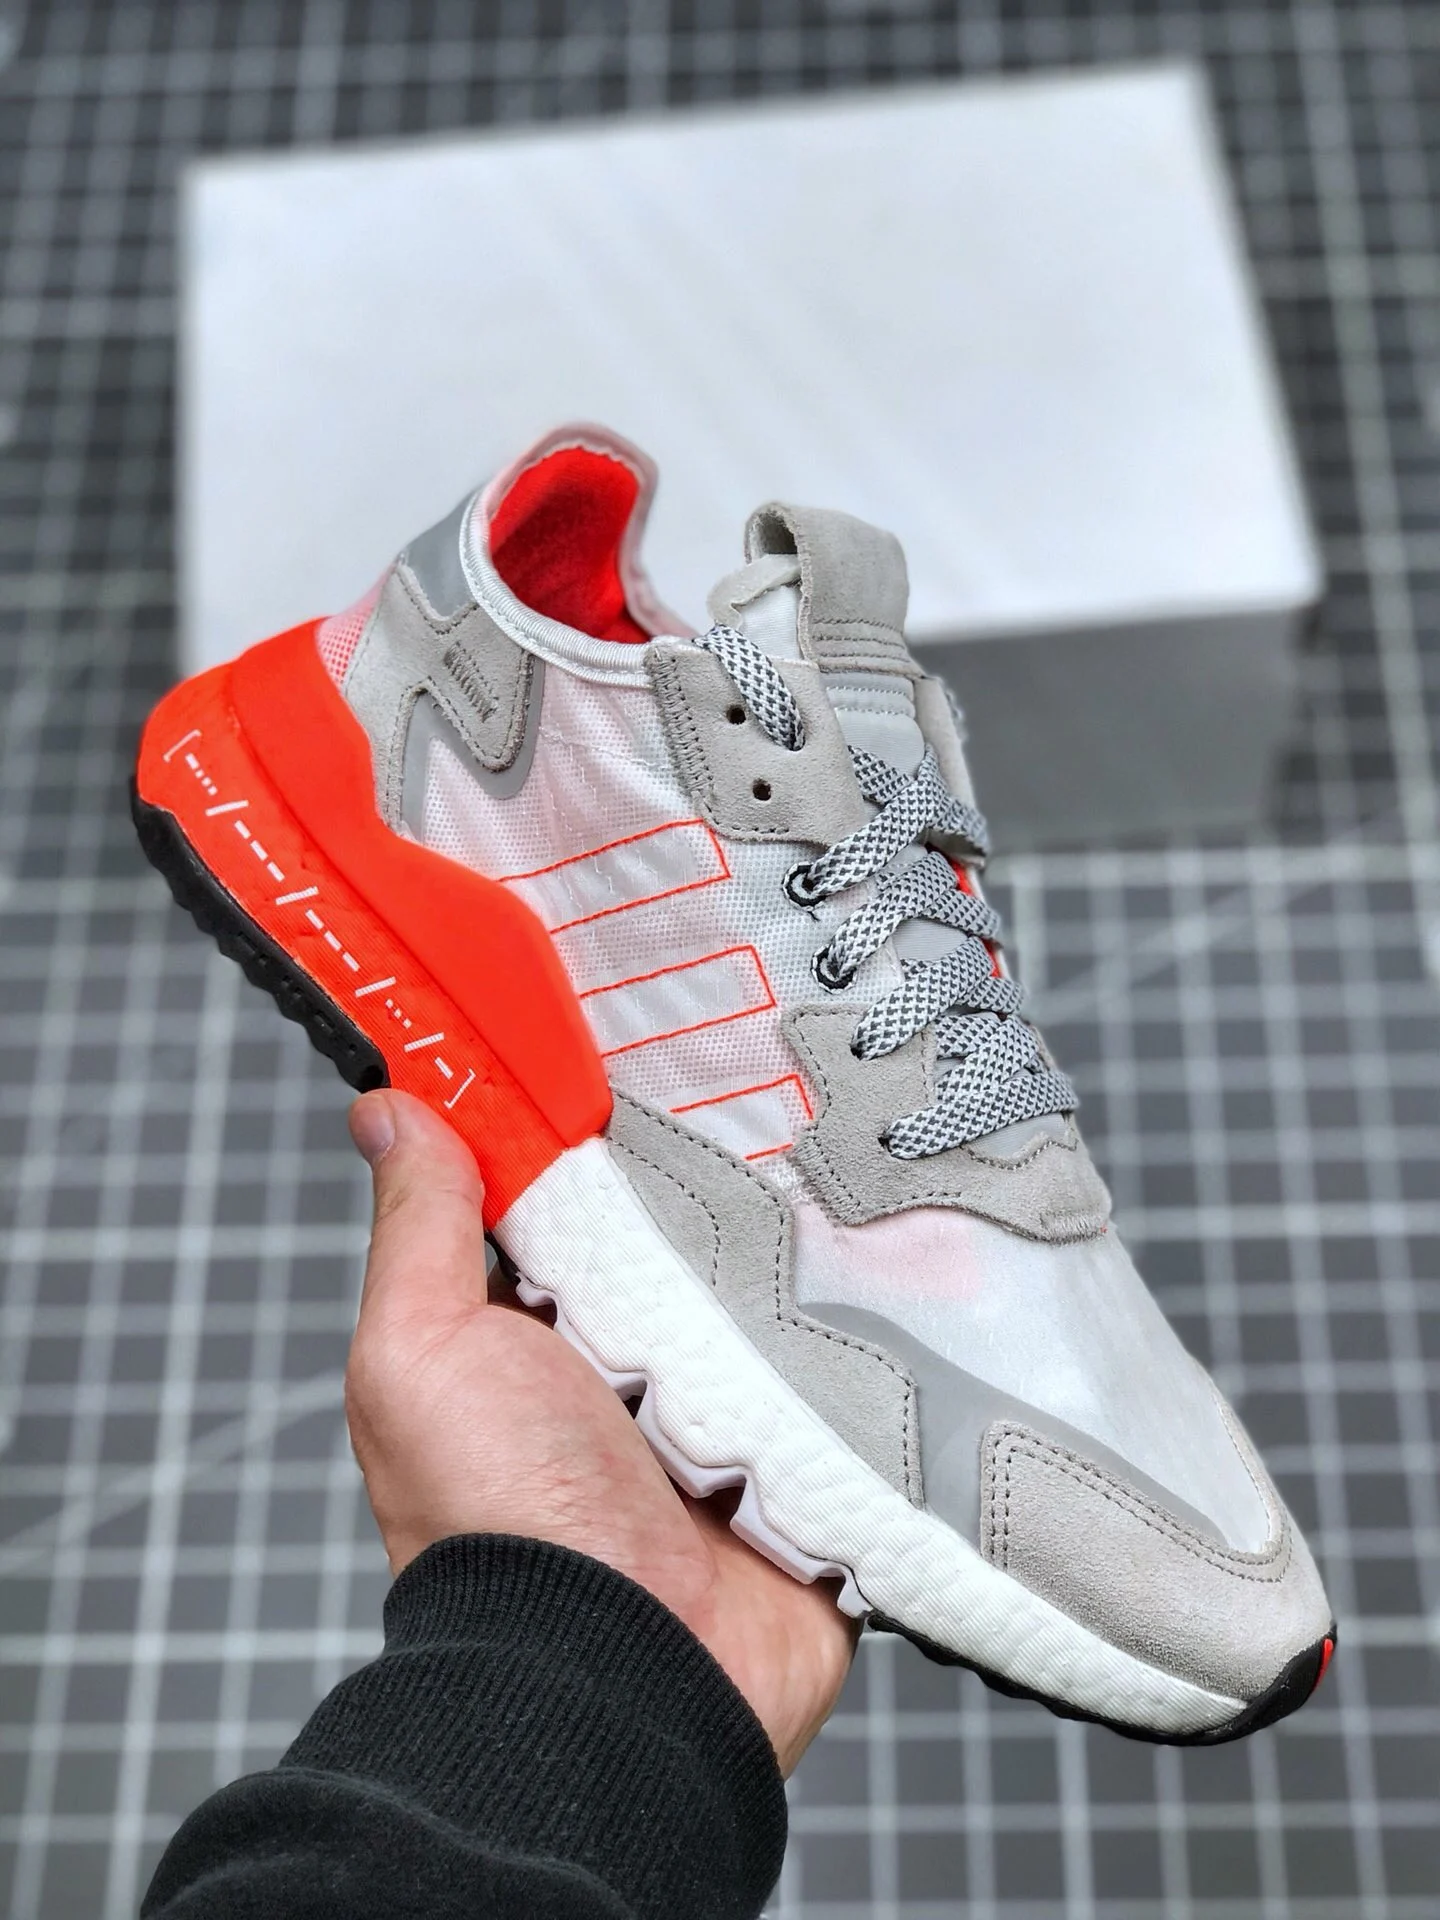 Adidas Nite Jogger White Solar Red For Sale